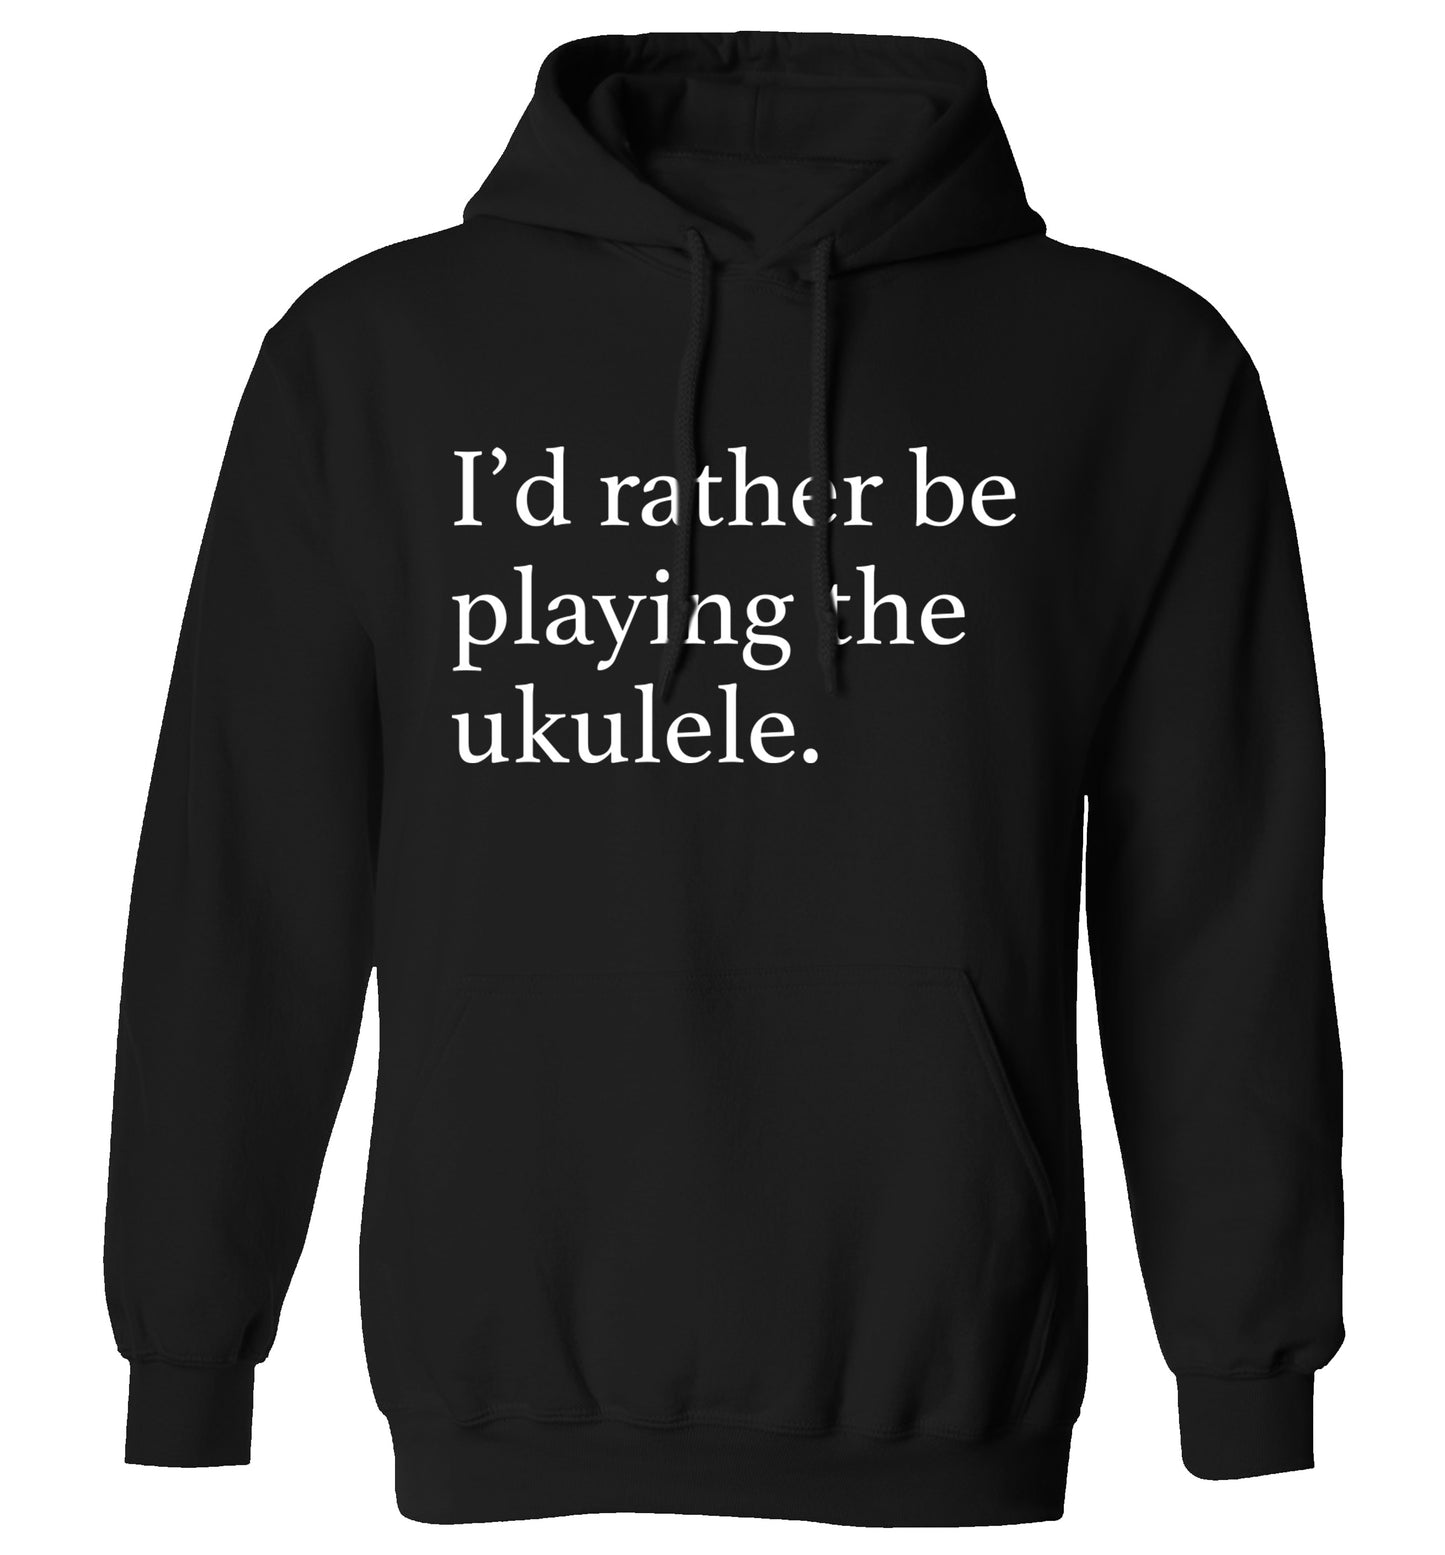 I'd rather by playing the ukulele adults unisex black hoodie 2XL